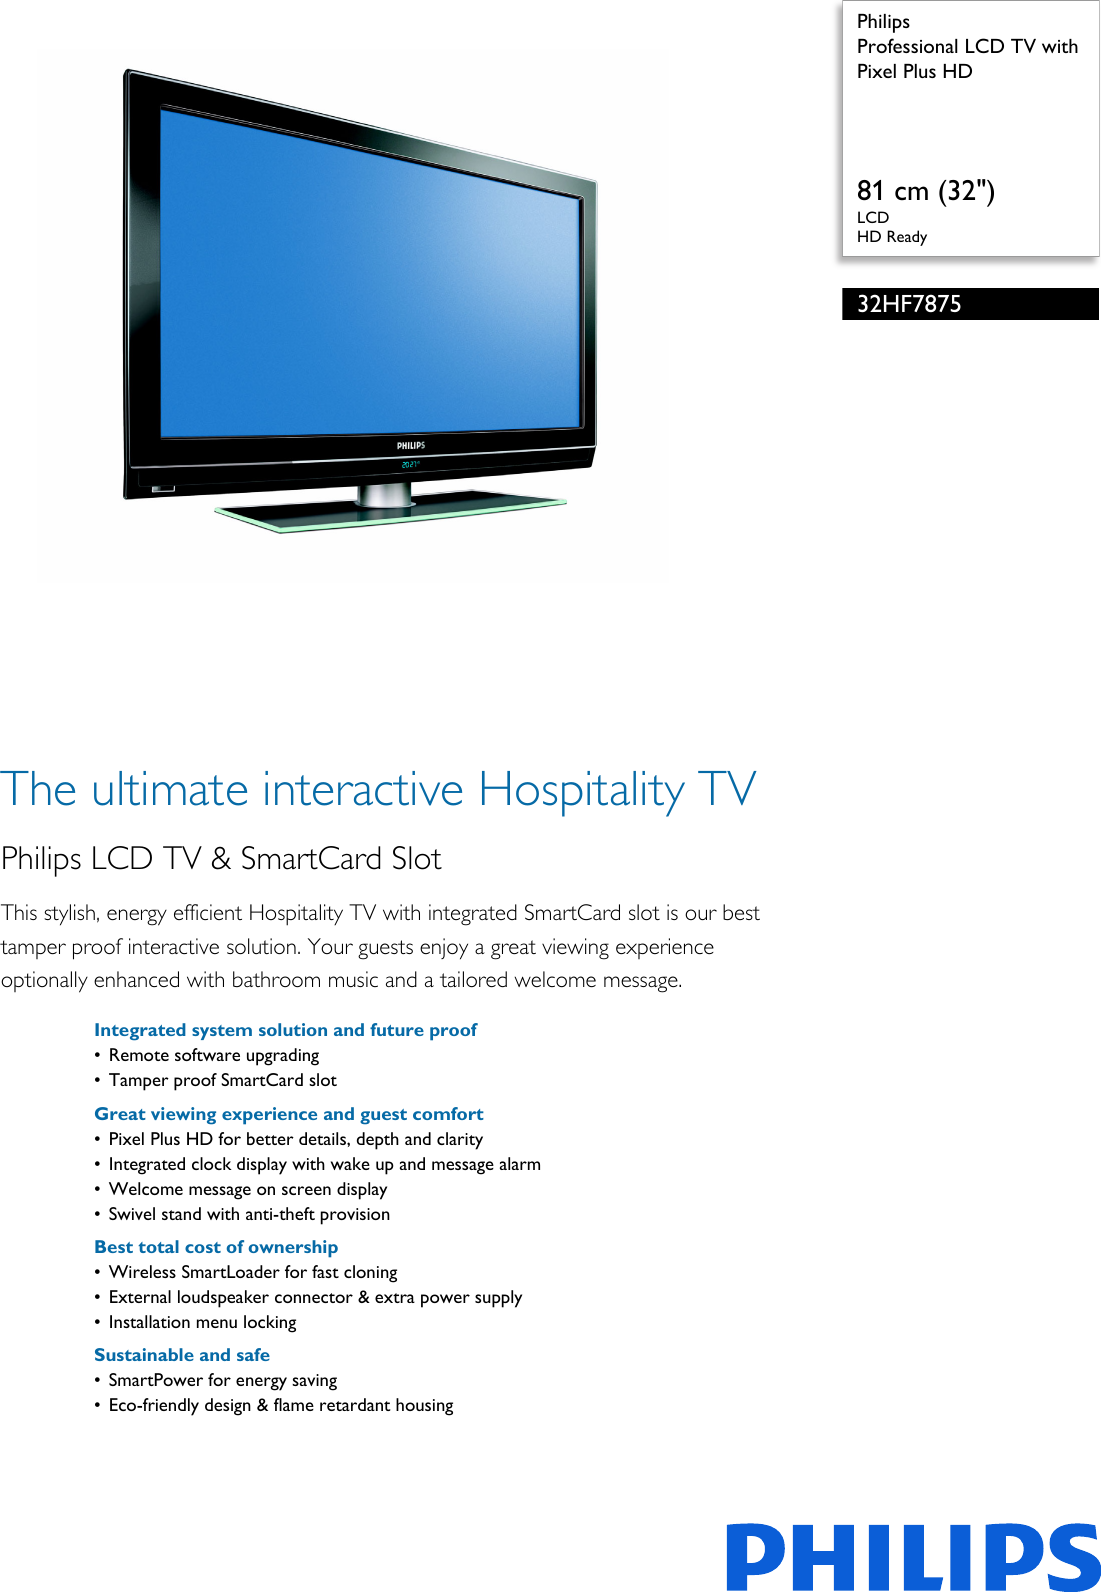 Page 1 of 3 - Philips 32HF7875/10 Professional LCD TV With Pixel Plus HD User Manual Leaflet 32hf7875 10 Pss